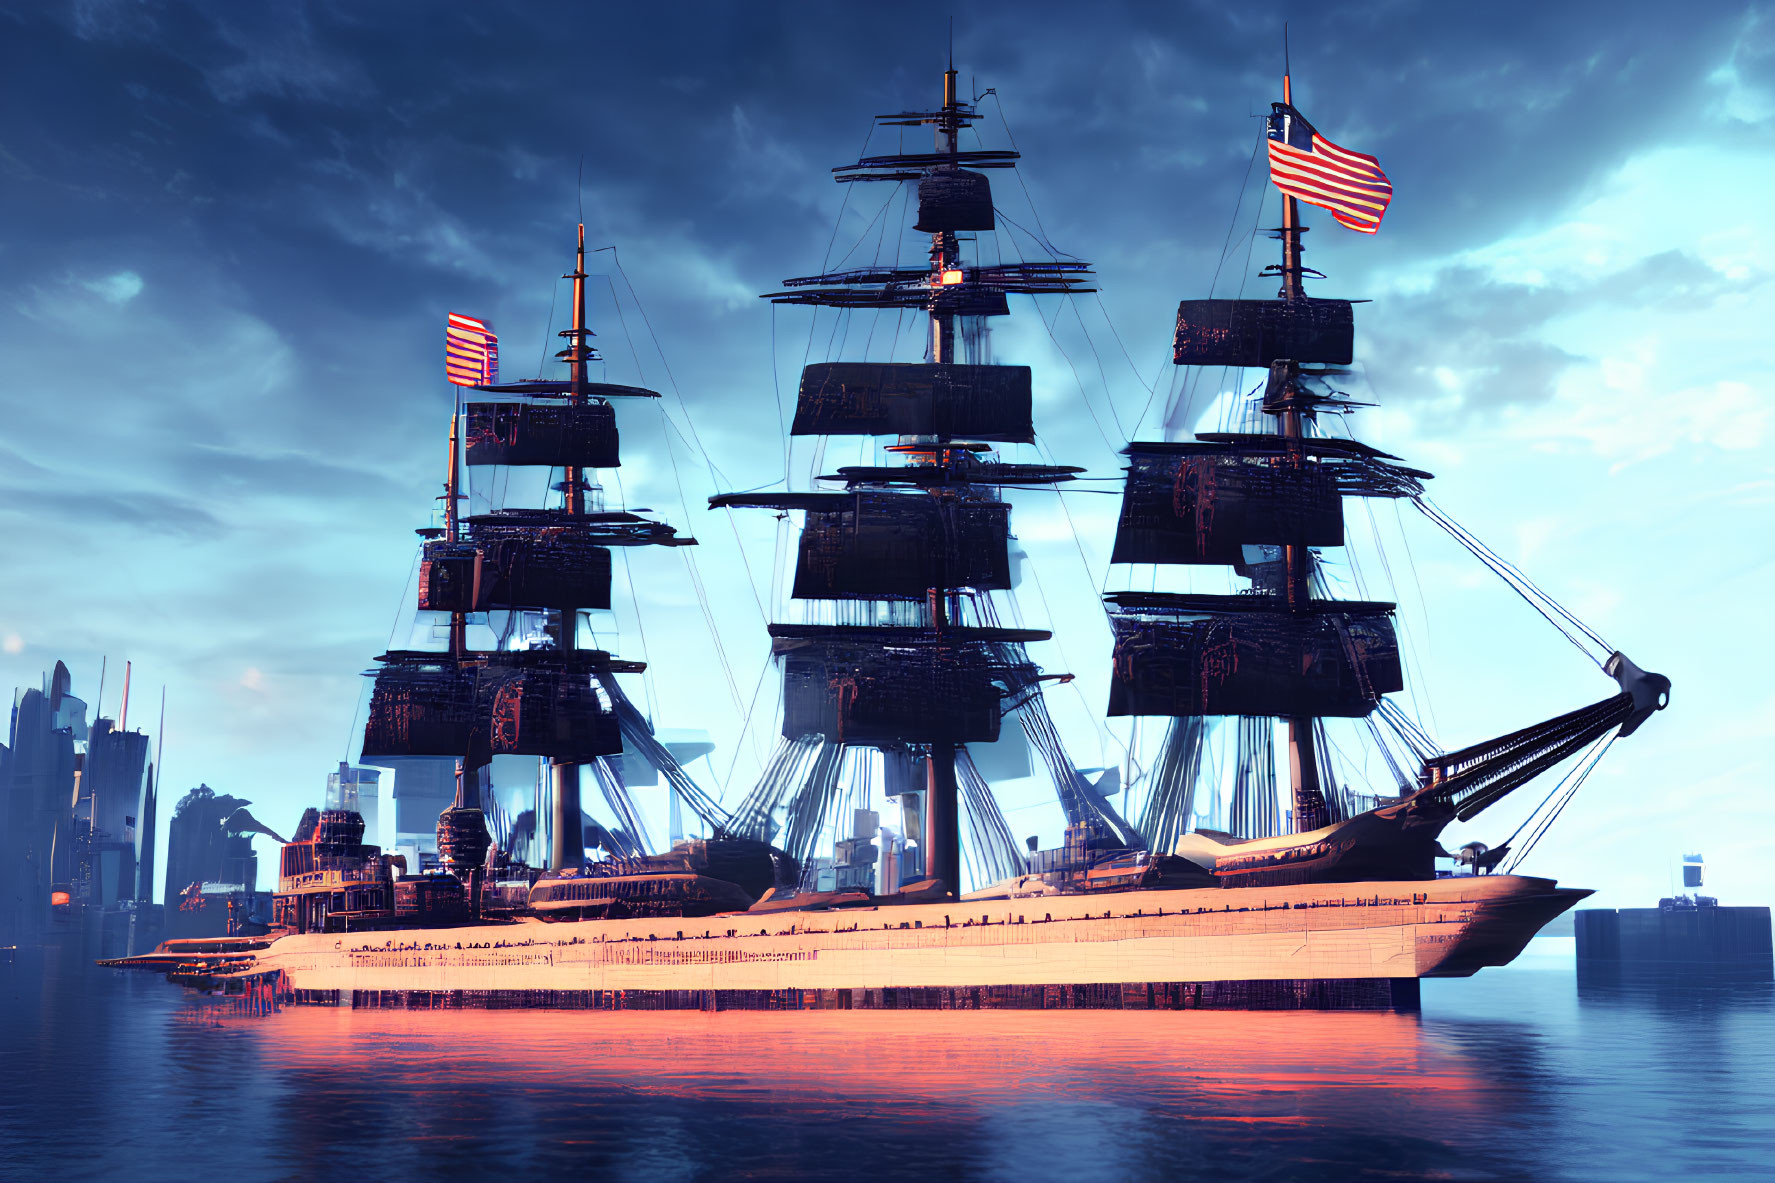 Computer-generated image: Two old sailing ships with American flags in modern city harbor at dusk